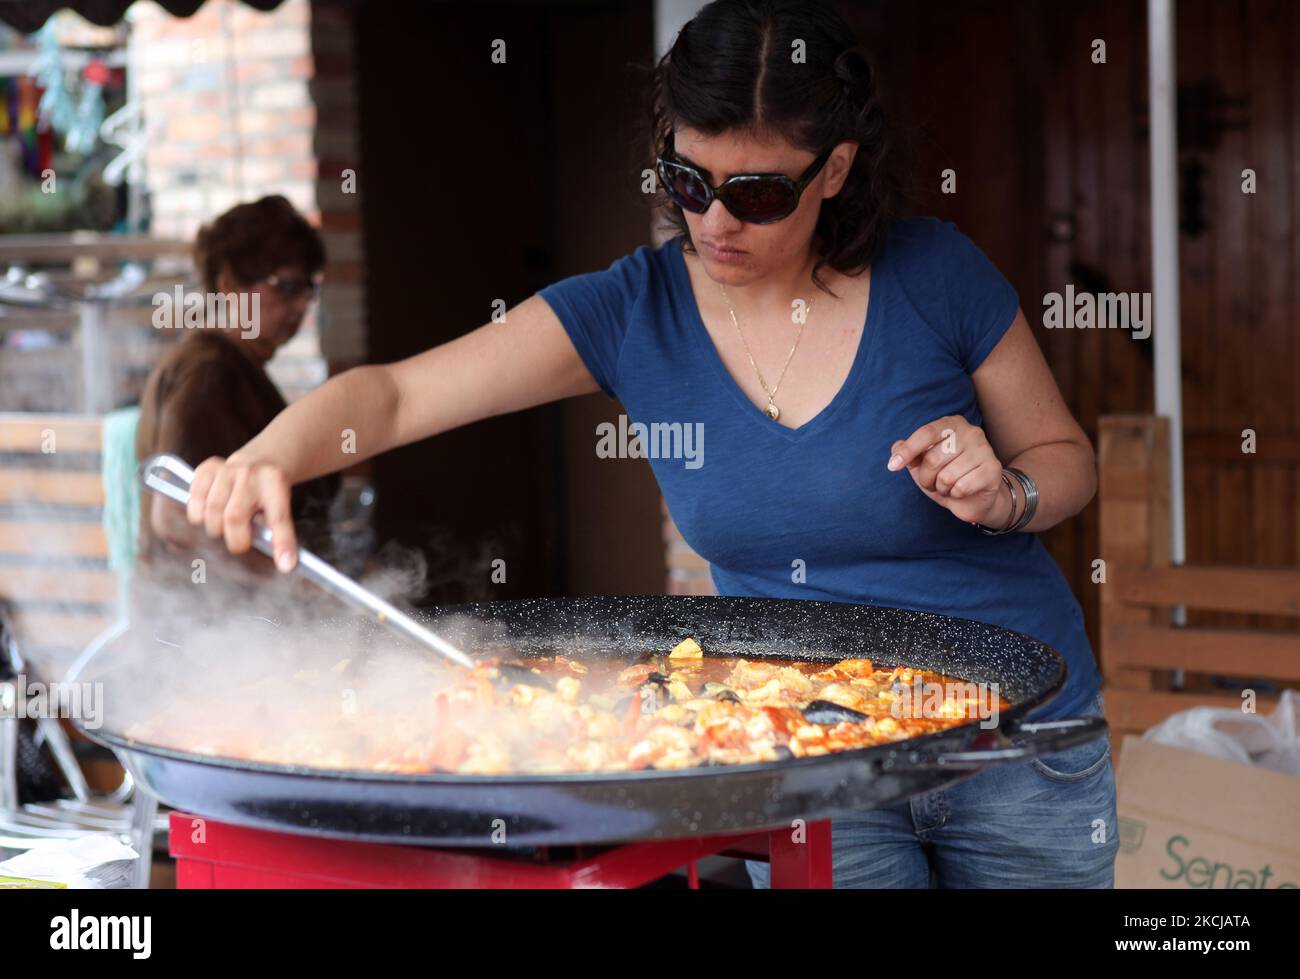 https://c8.alamy.com/comp/2KCJATA/spanish-woman-cooking-paella-in-a-large-pot-outside-a-spanish-restaurant-in-toronto-ontario-canada-on-august-07-2010-photo-by-creative-touch-imaging-ltdnurphoto-2KCJATA.jpg